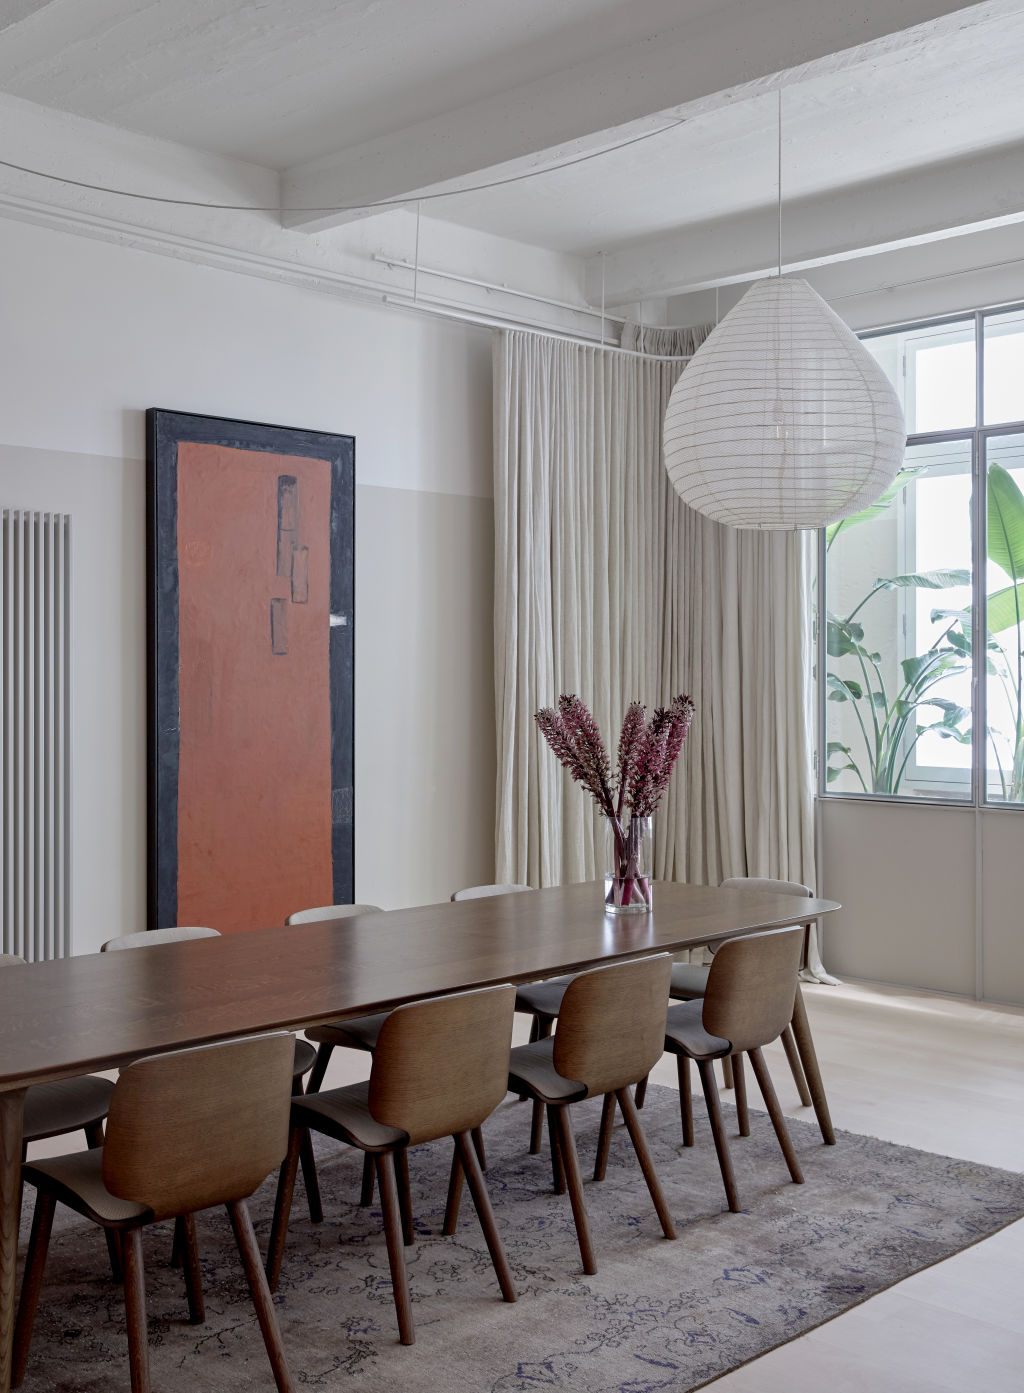 The conversion has transformed how the owners live in the space, making it an idyllic tranquil abode. Photo: James Geer, styling by Bek Sheppard